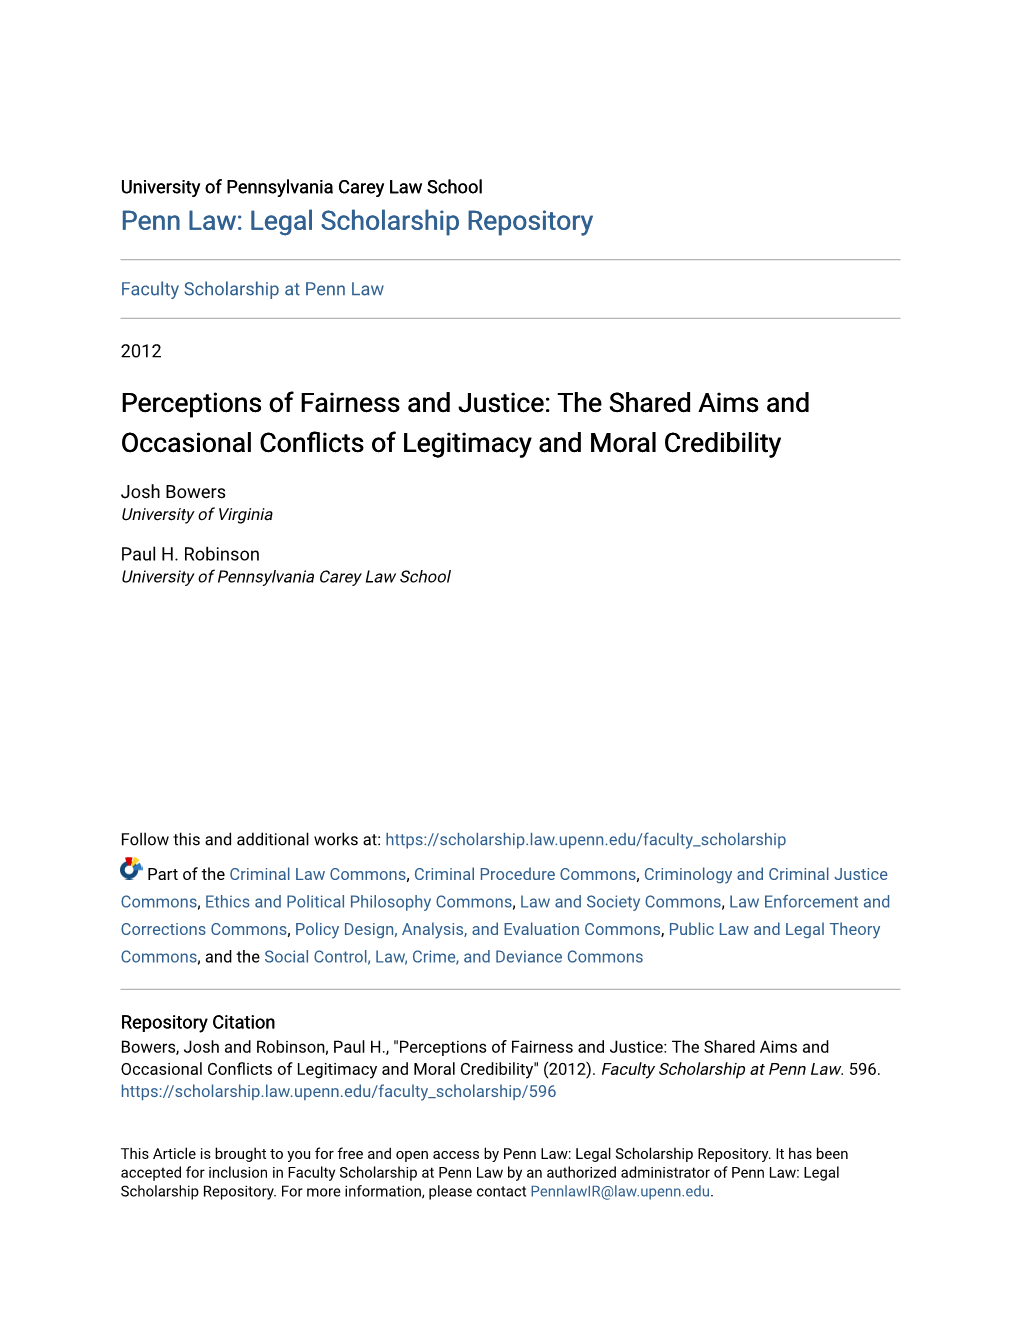 Perceptions of Fairness and Justice: the Shared Aims and Occasional Conflicts of Legitimacy and Moral Credibility